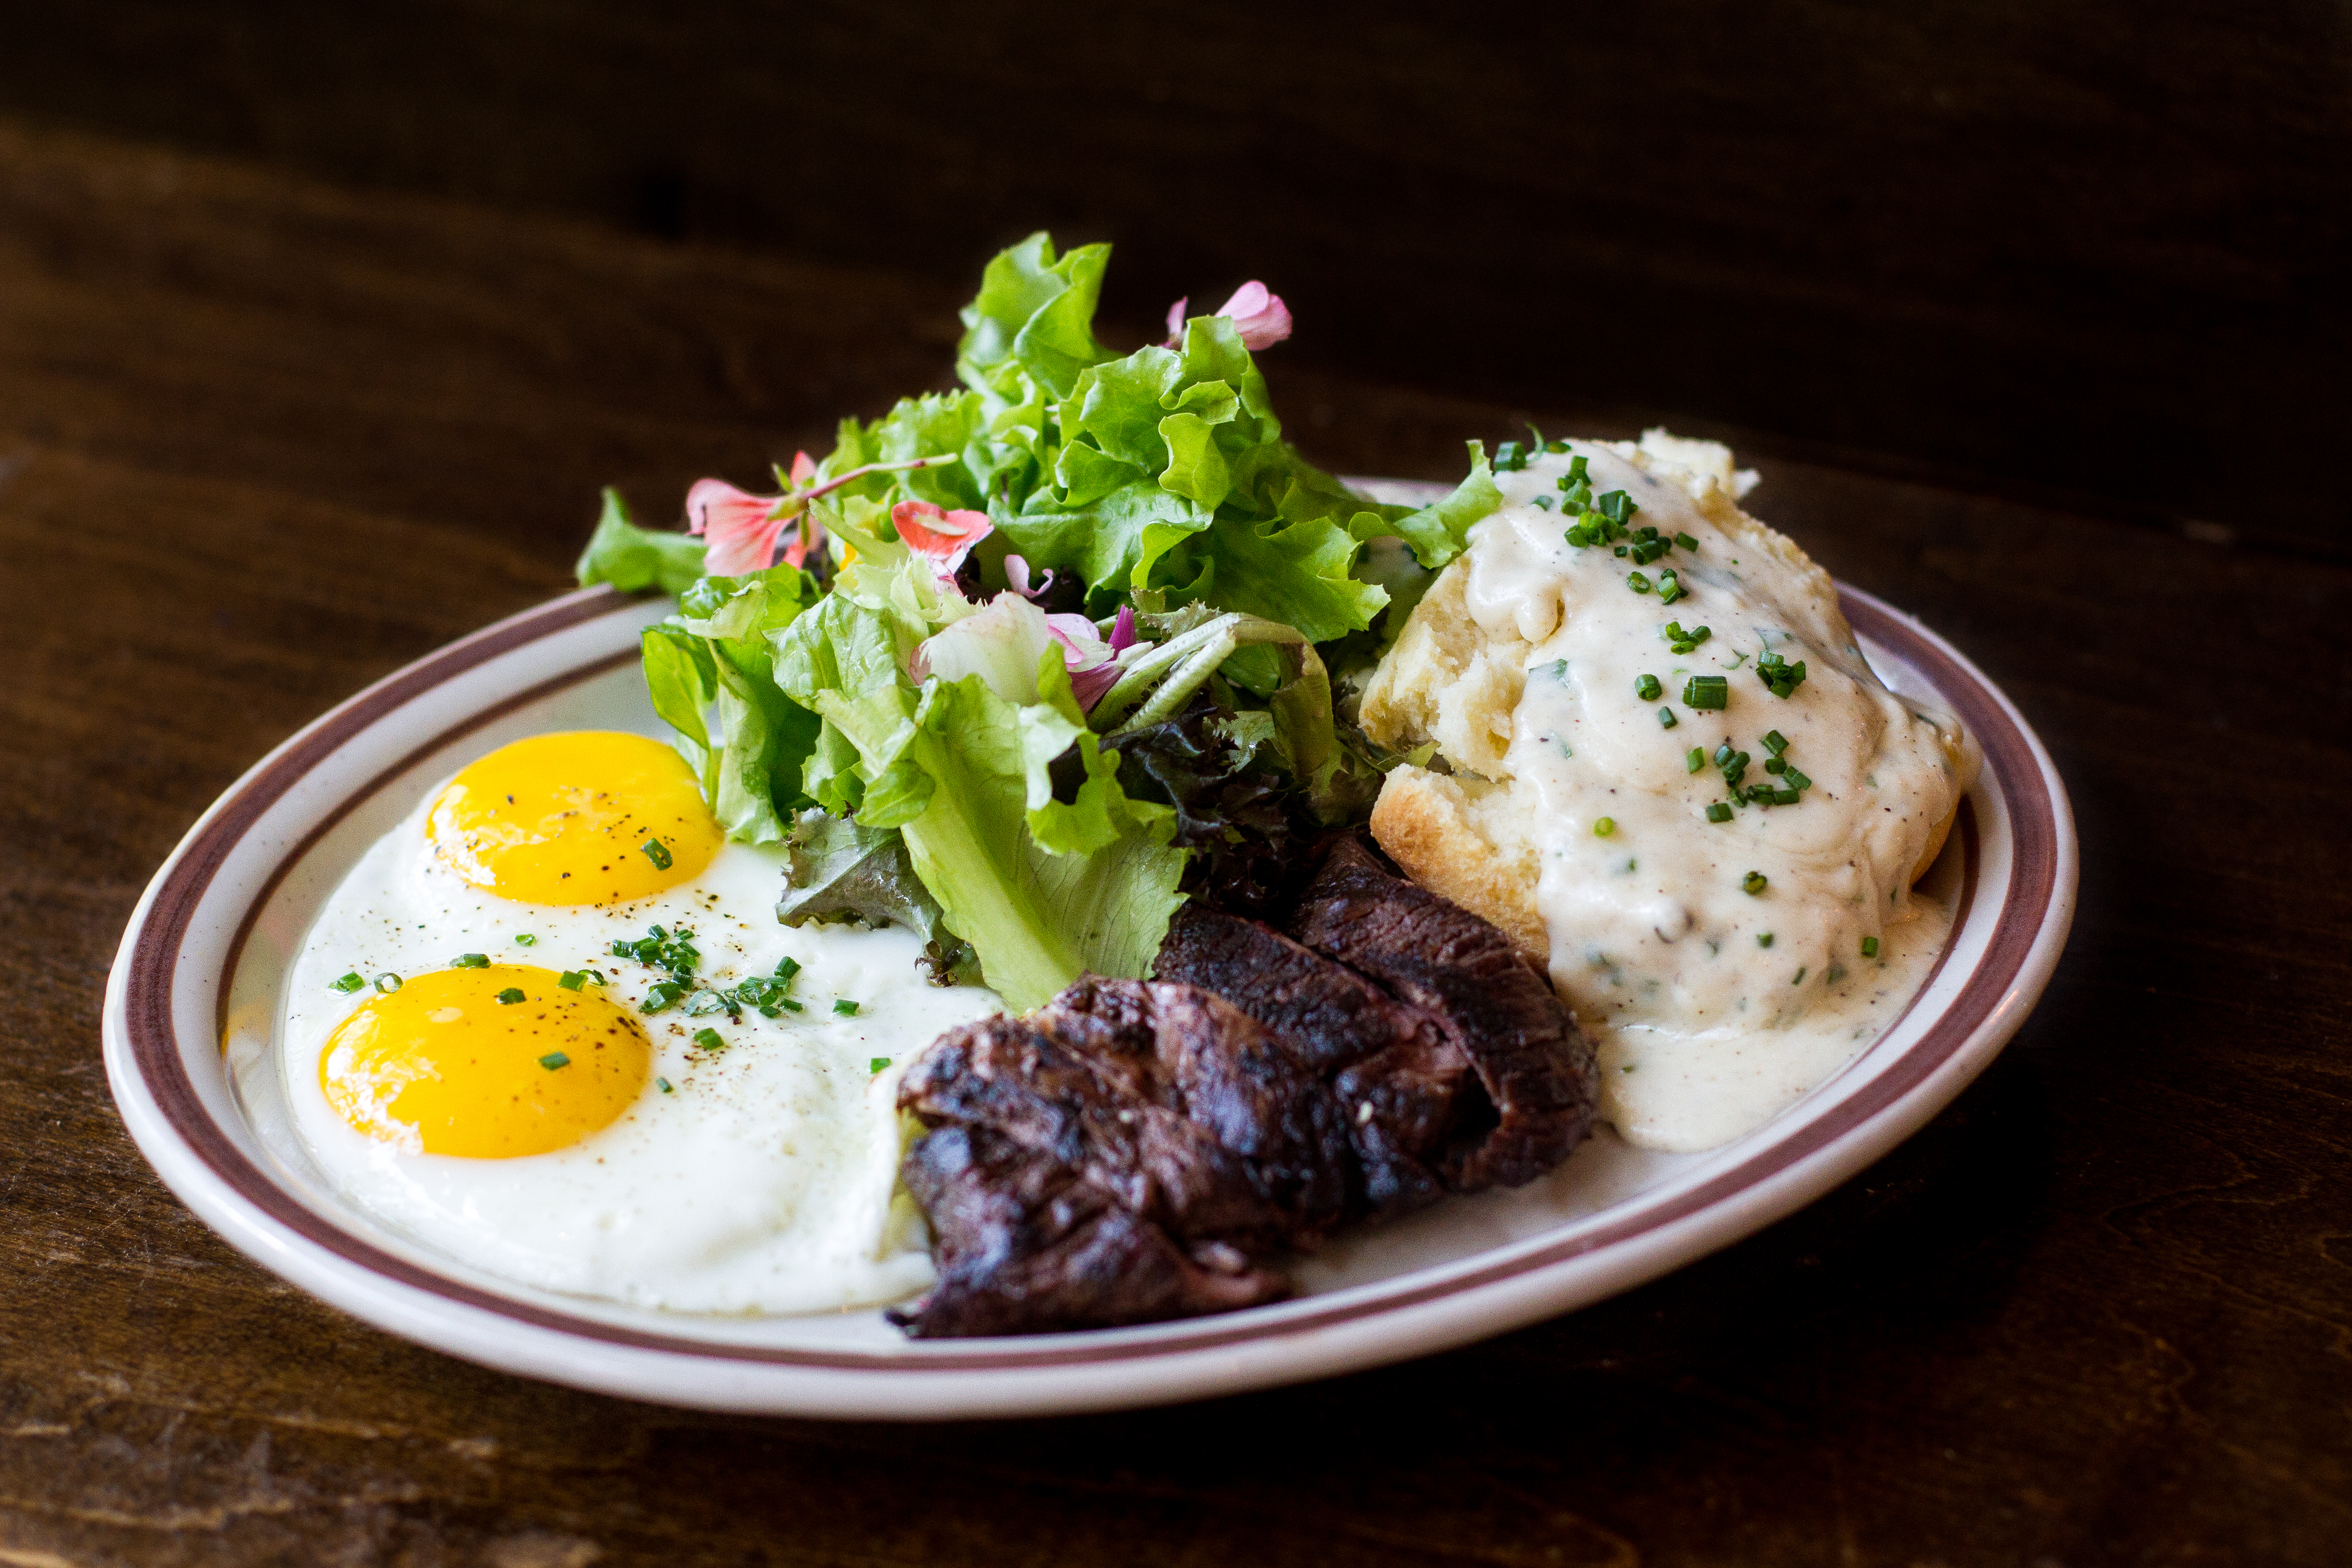 A white plate of two sunny side up eggs, a small streak filet, a biscuit with gravy, and a small salad